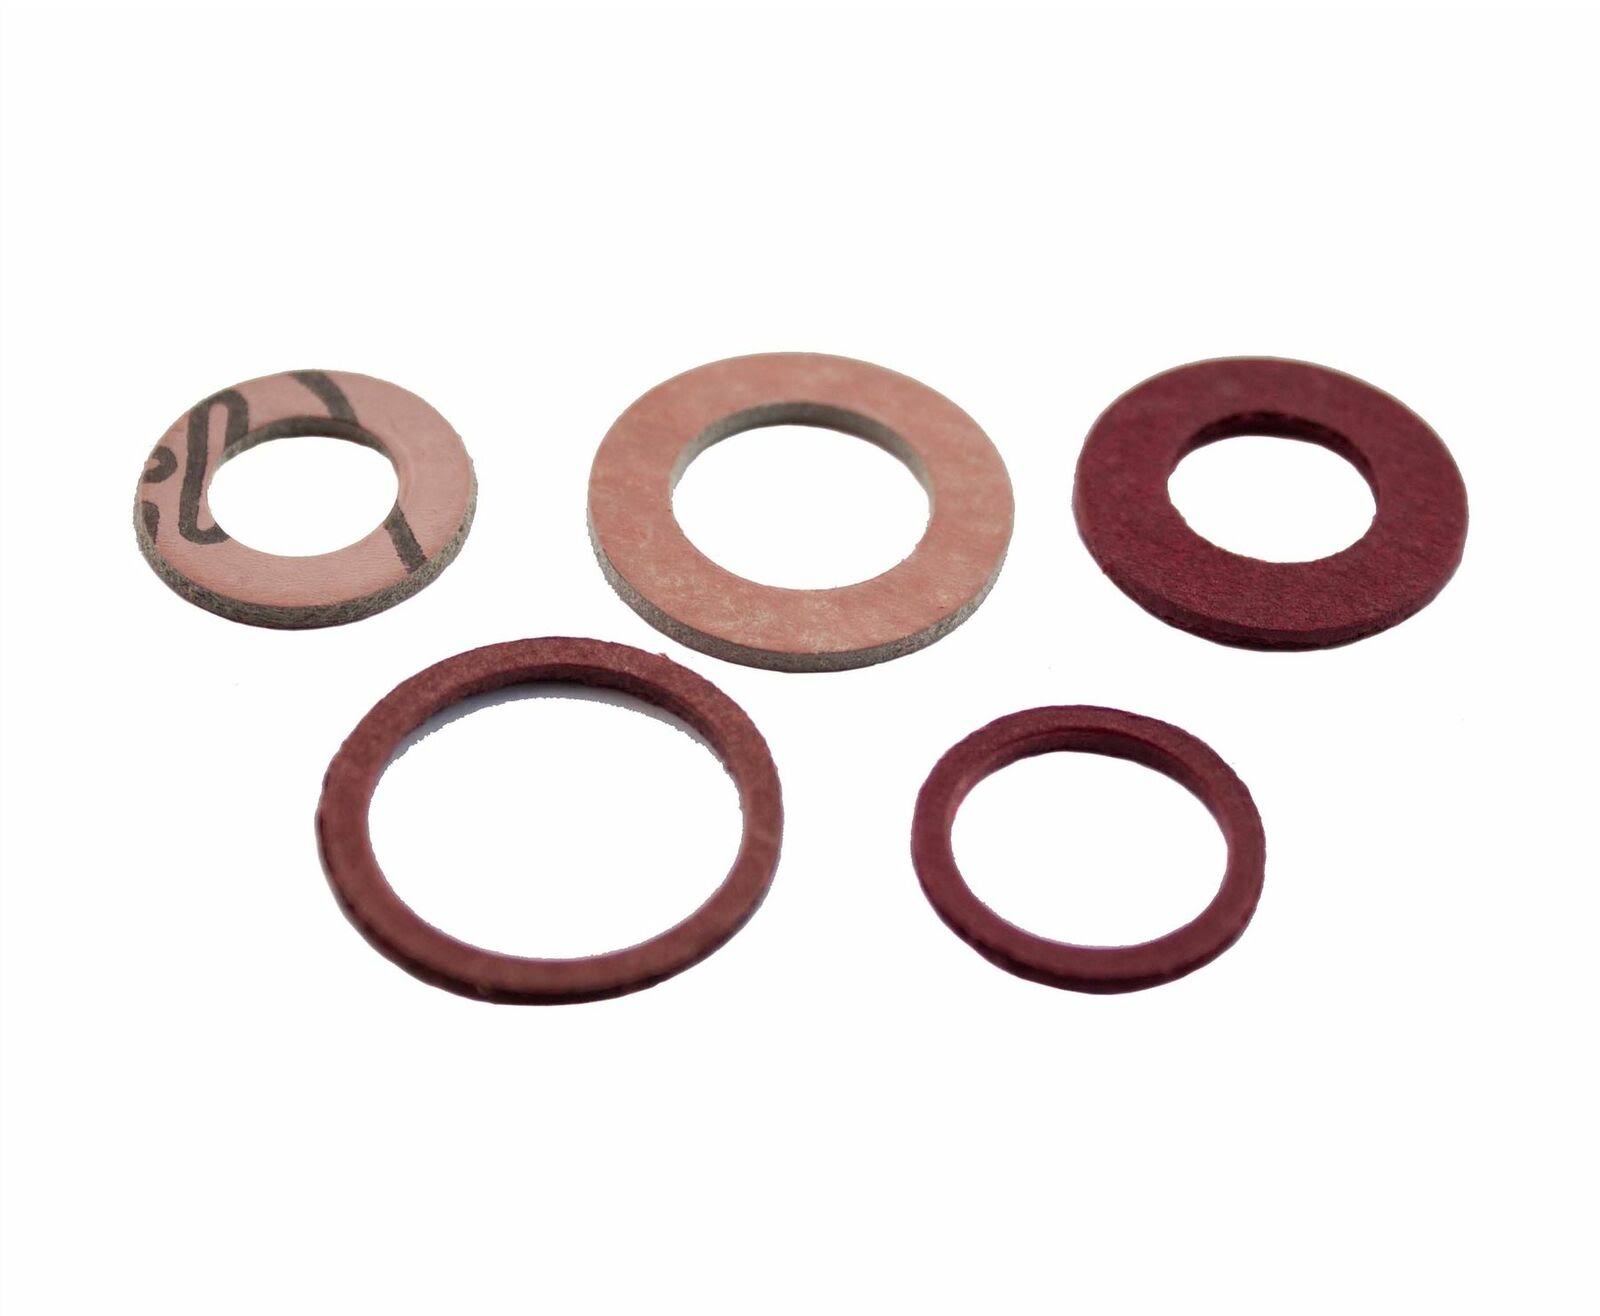 Oracstar Assorted Fibre Washers - Pack 6